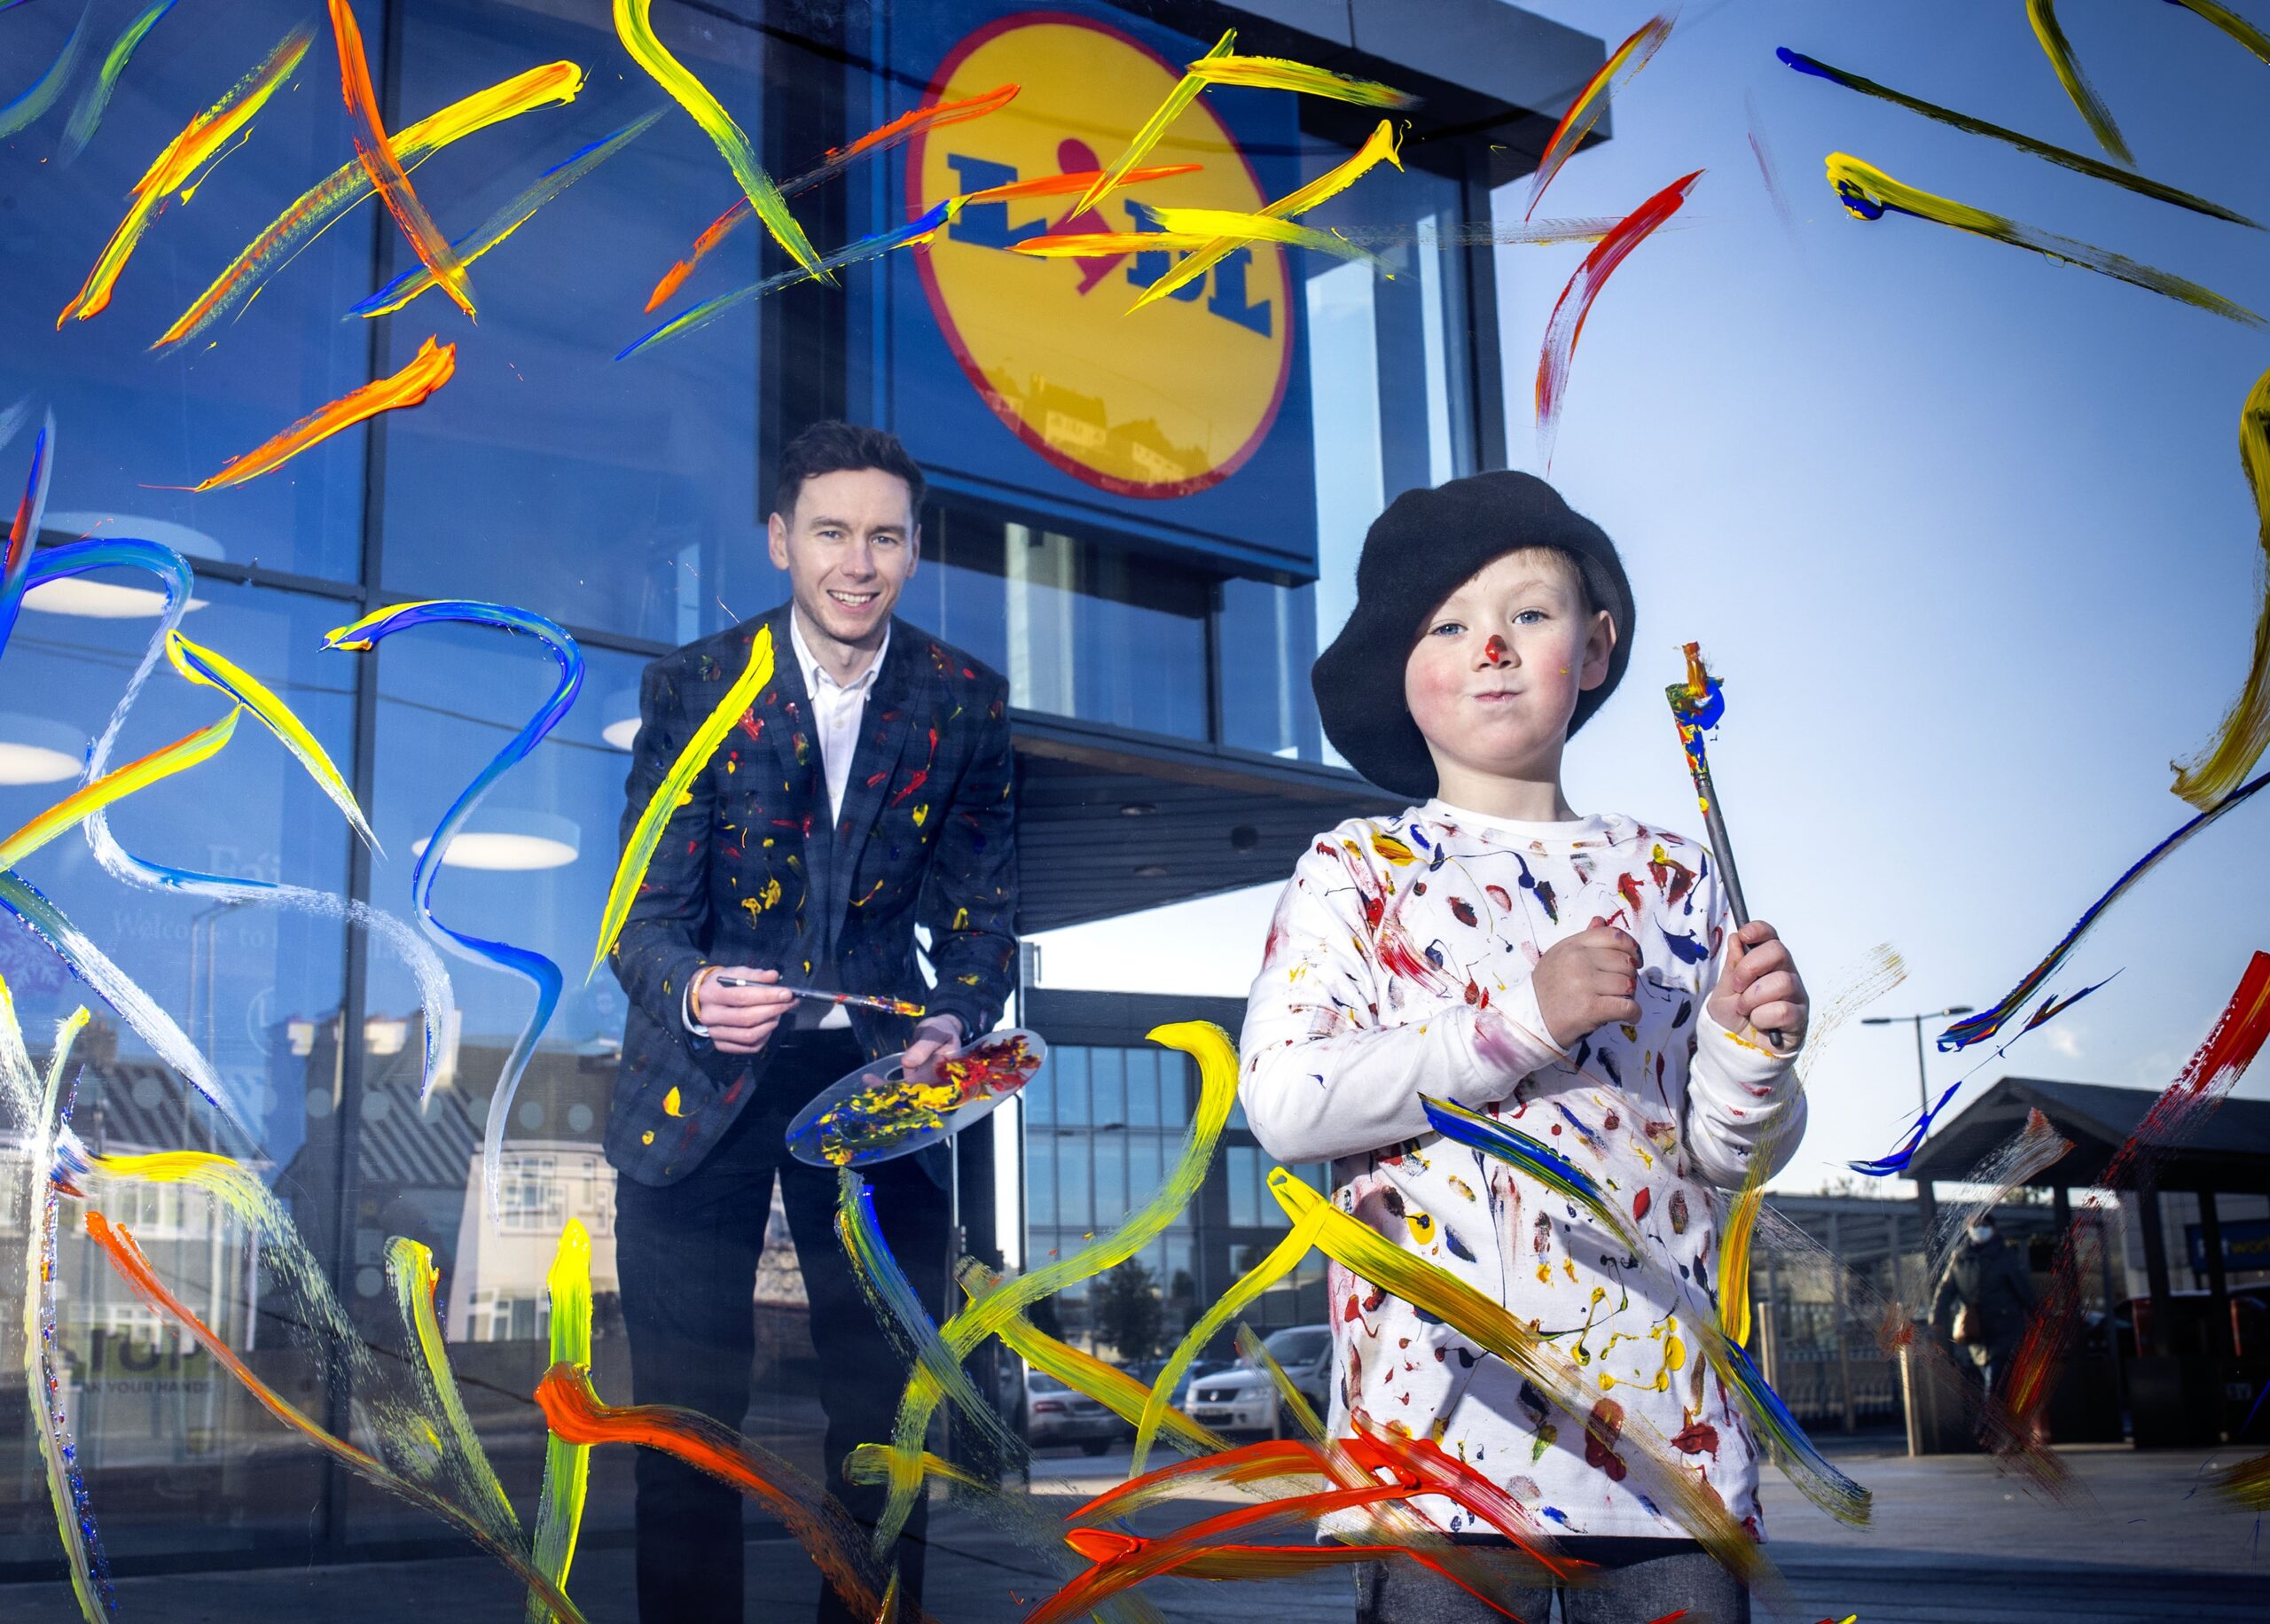 Lidl Northern Ireland on the Hunt for Kids with Bags of Style - Lidl Newry - NEWRY BUSINESS NEWS